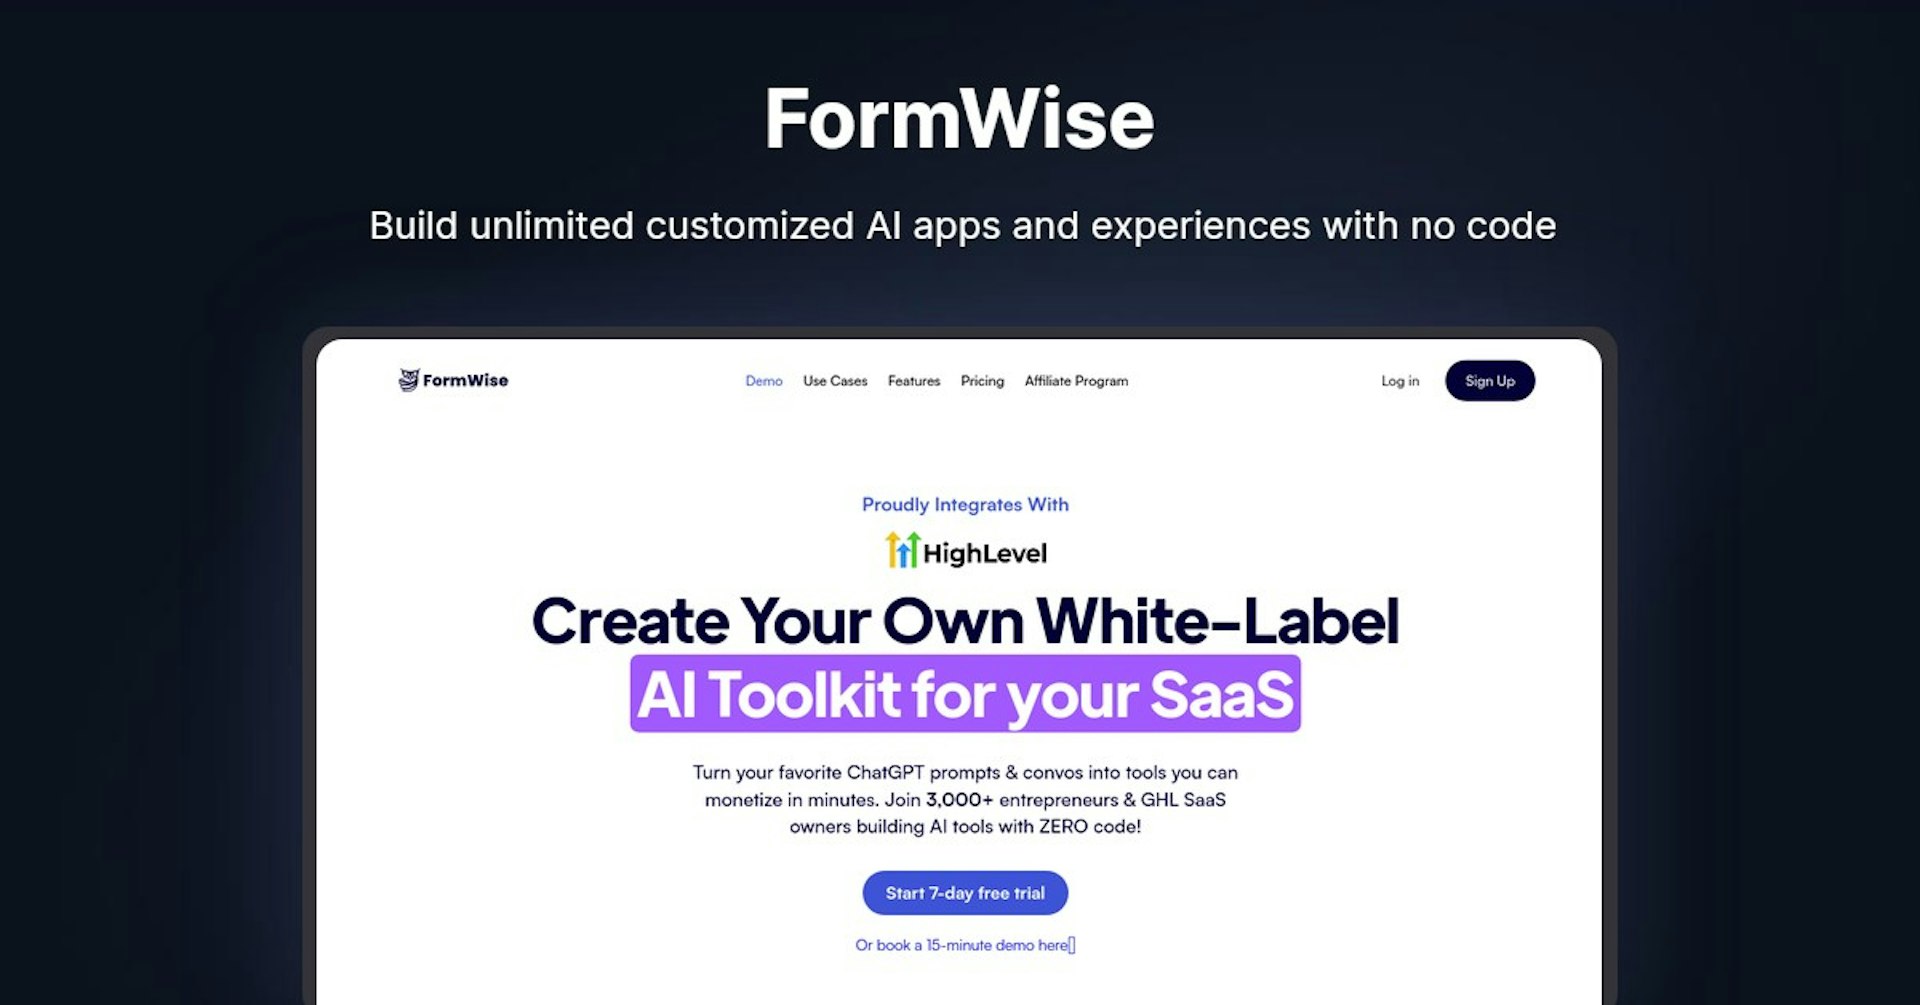 FormWise